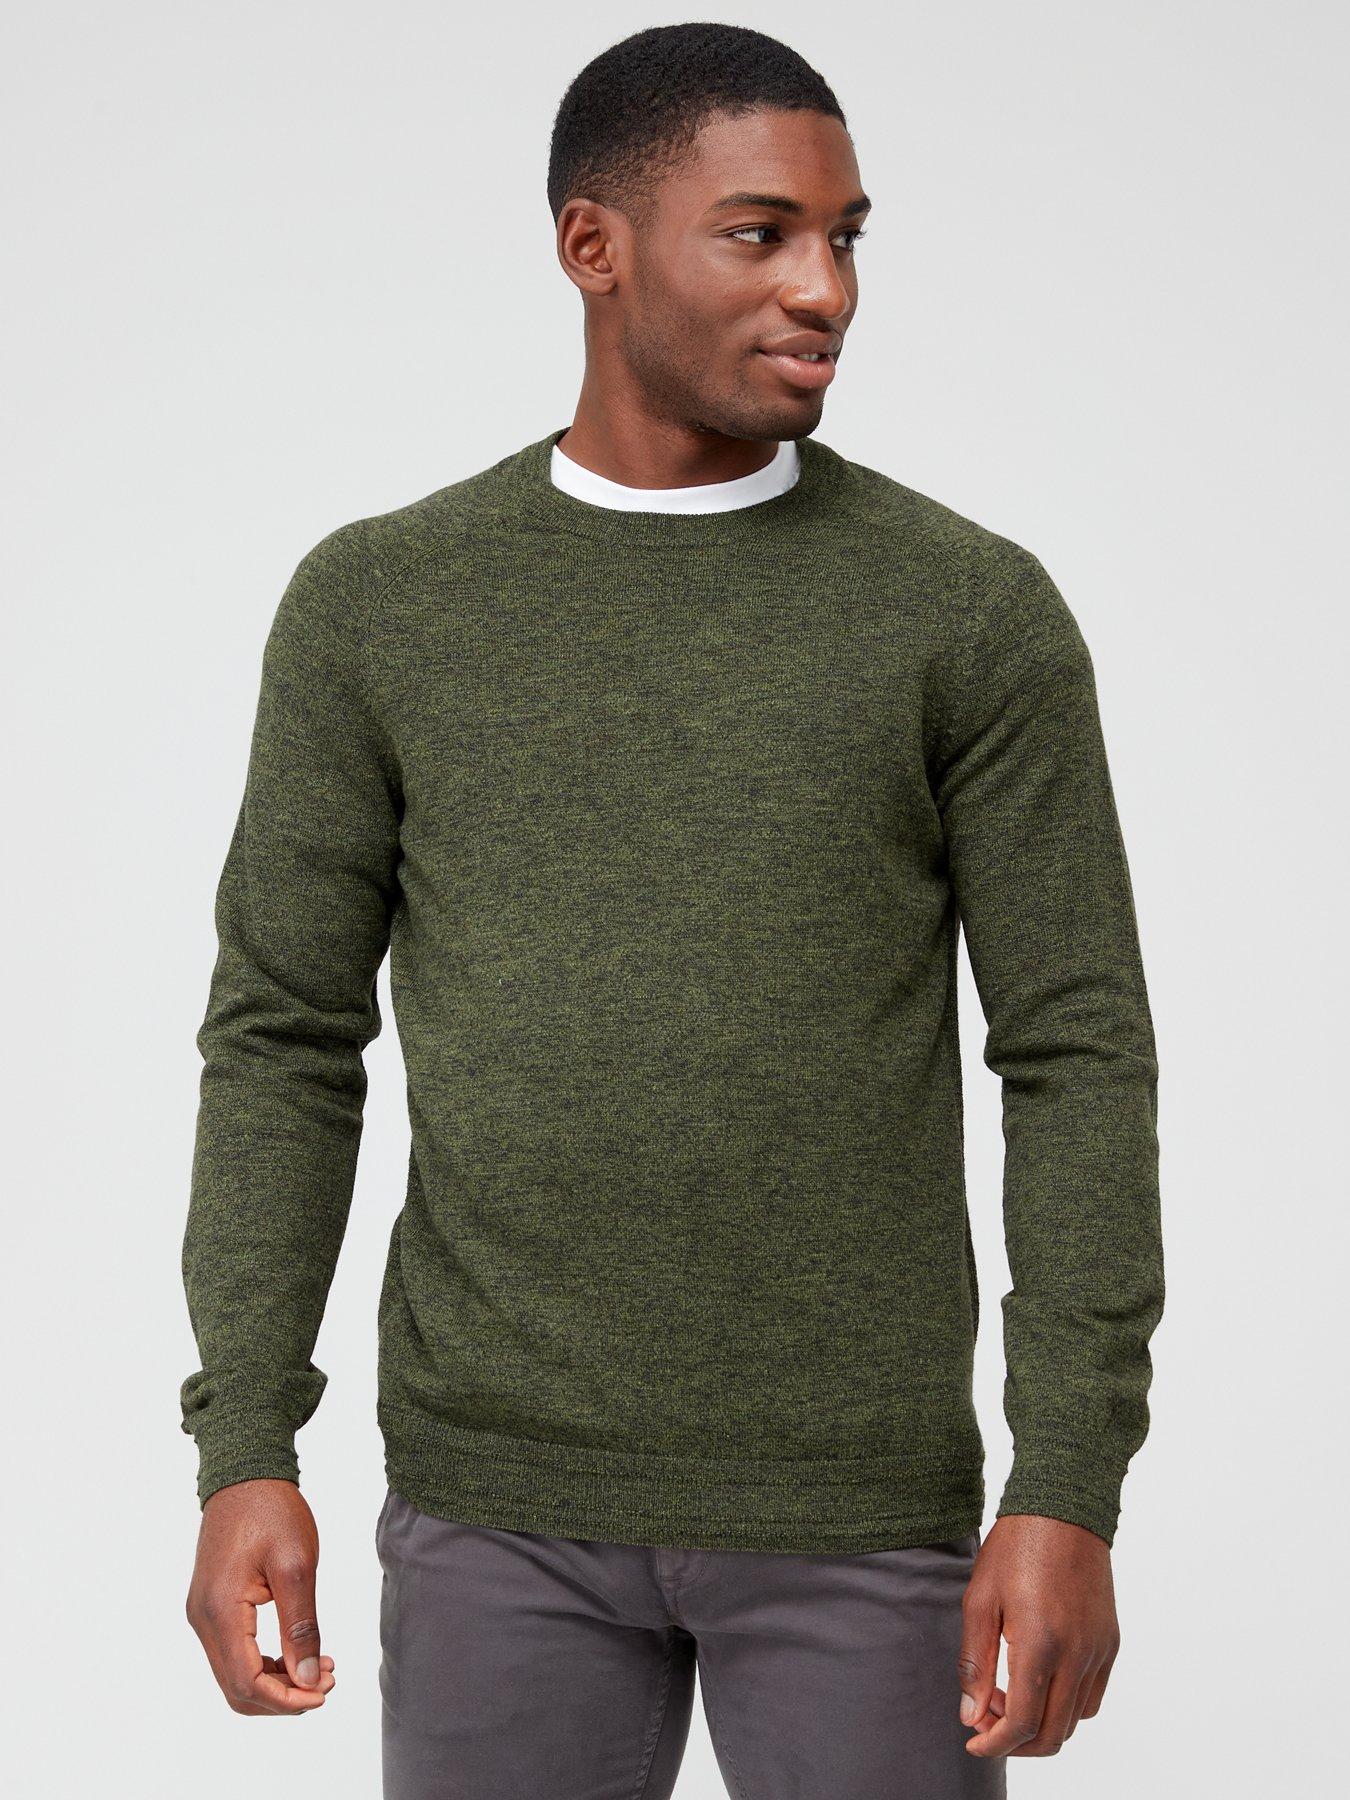 Men's Sweaters and Knits, Explore our New Arrivals